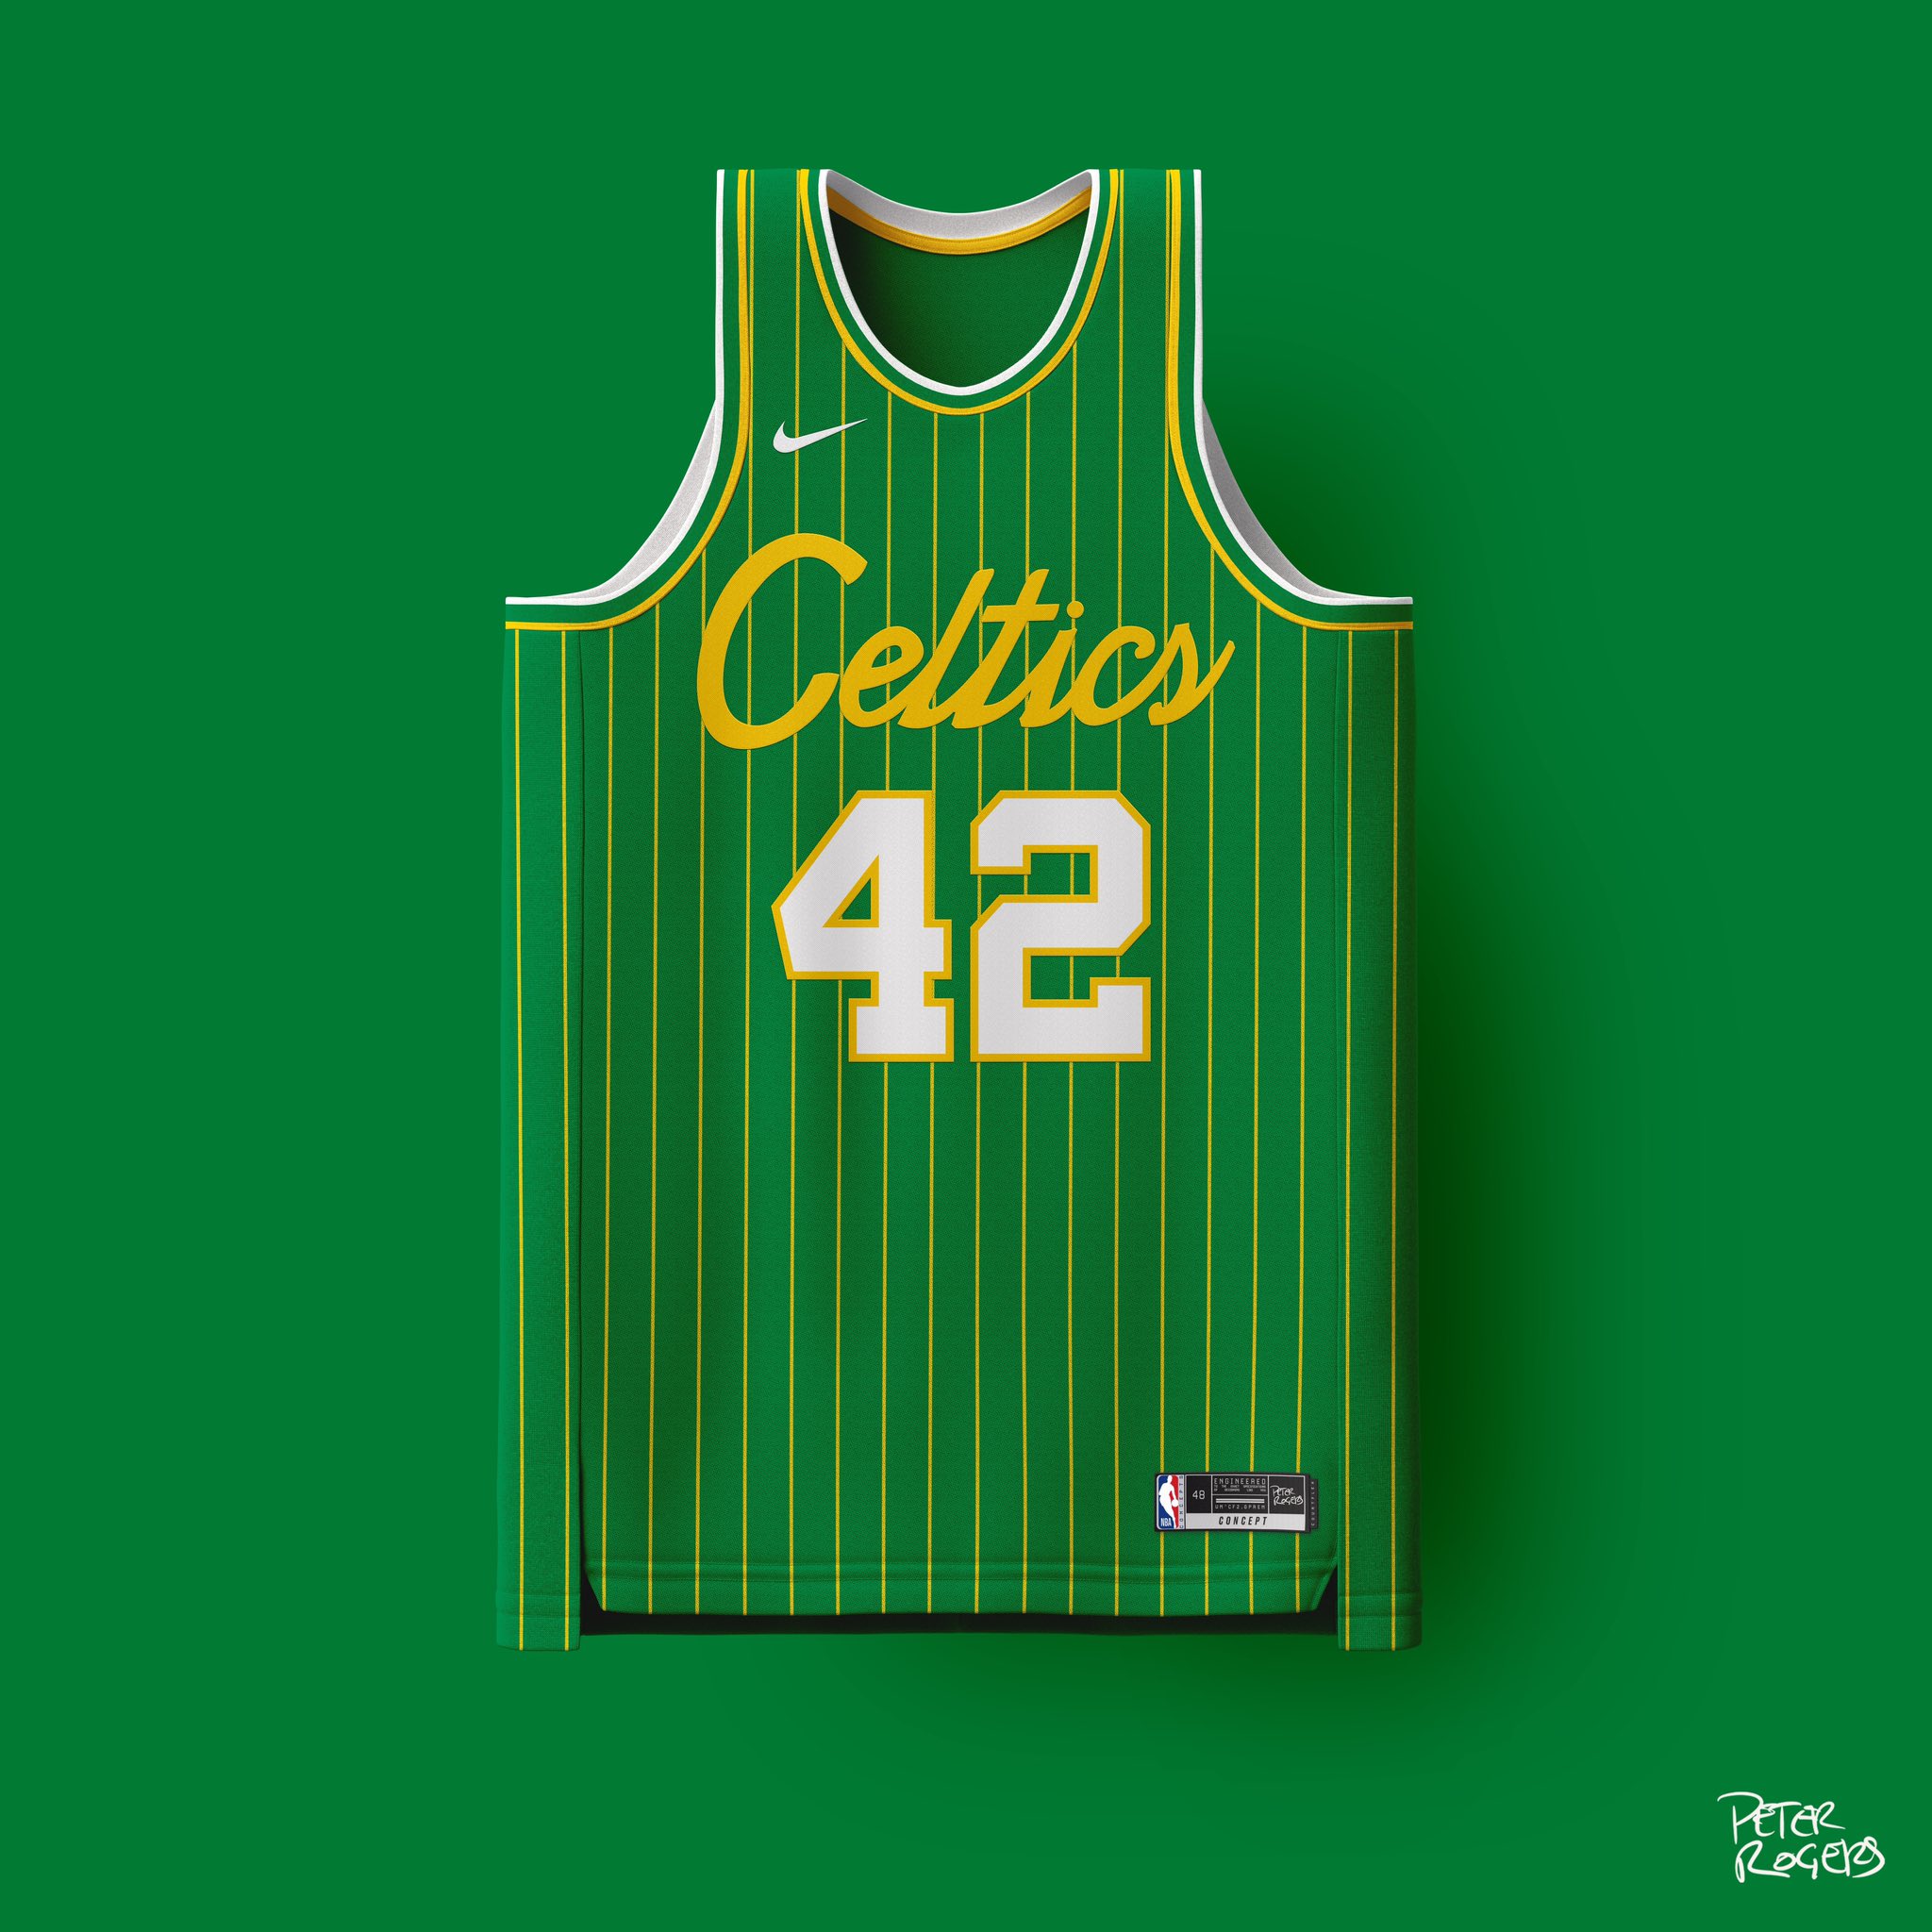 Meet Pete Rogers, the Celtics fan who designs a new jersey after every win  : r/bostonceltics